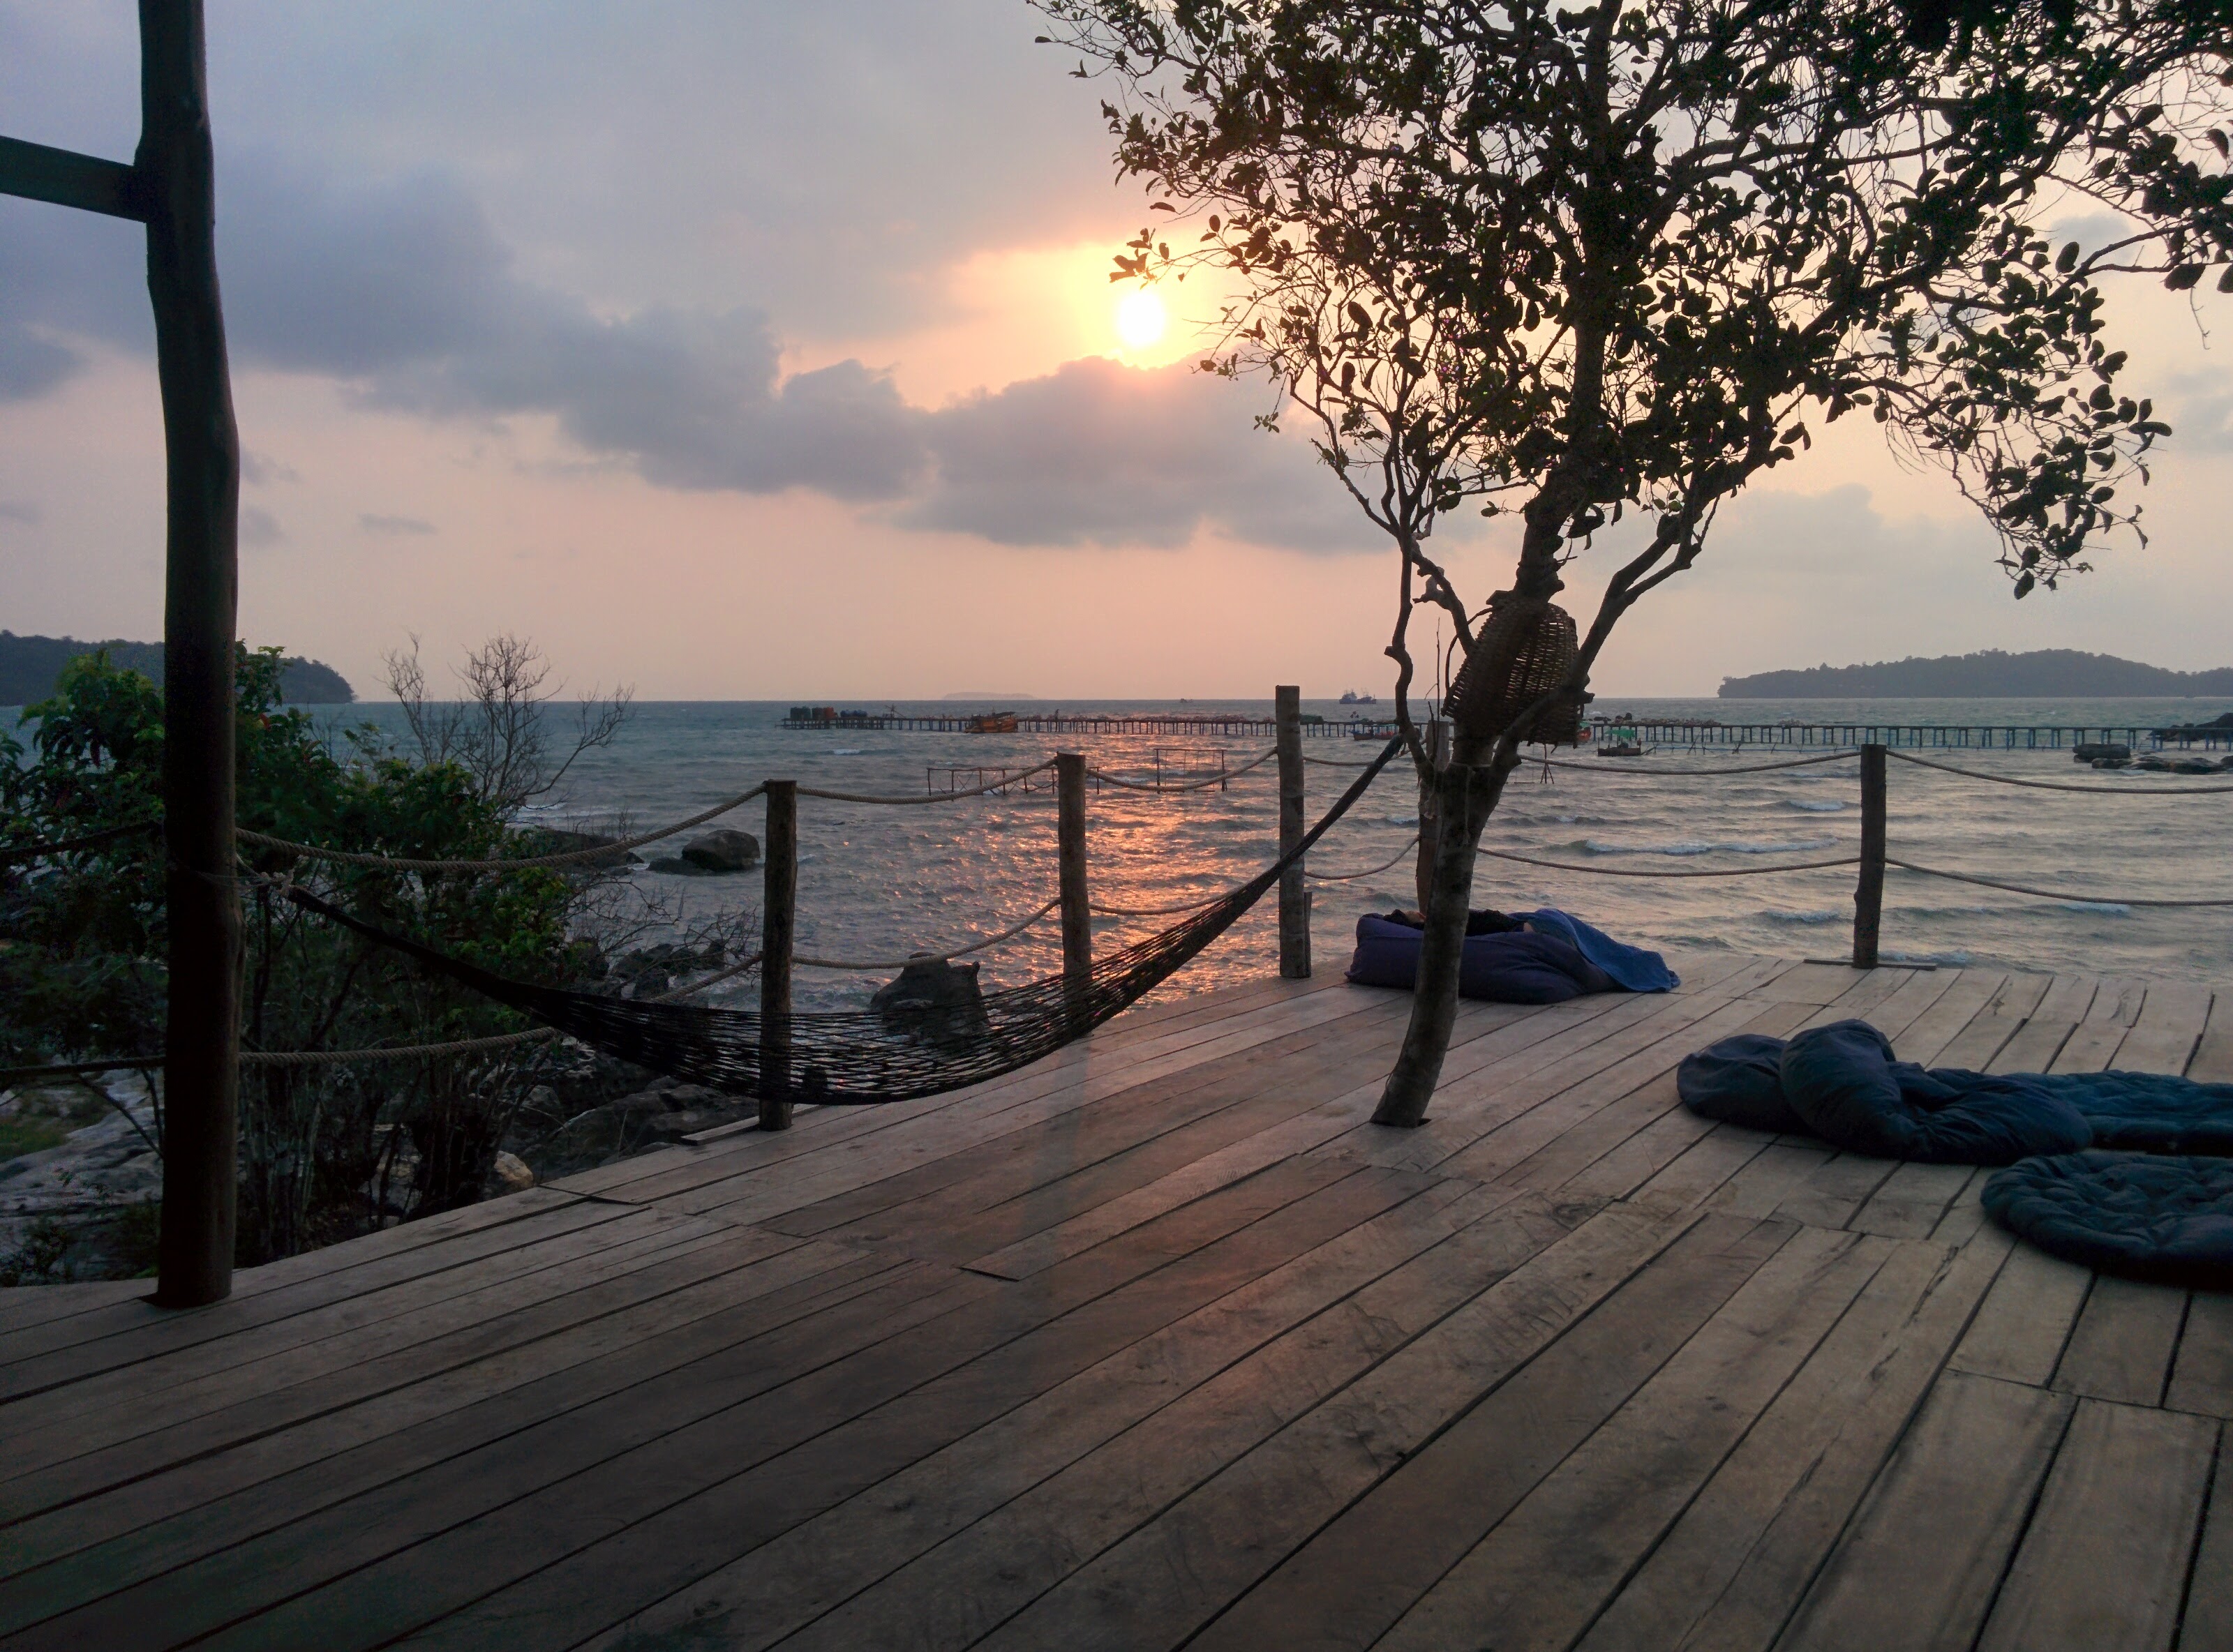 Sihanoukville, Koh Rong Islands and the best hostel in Asia